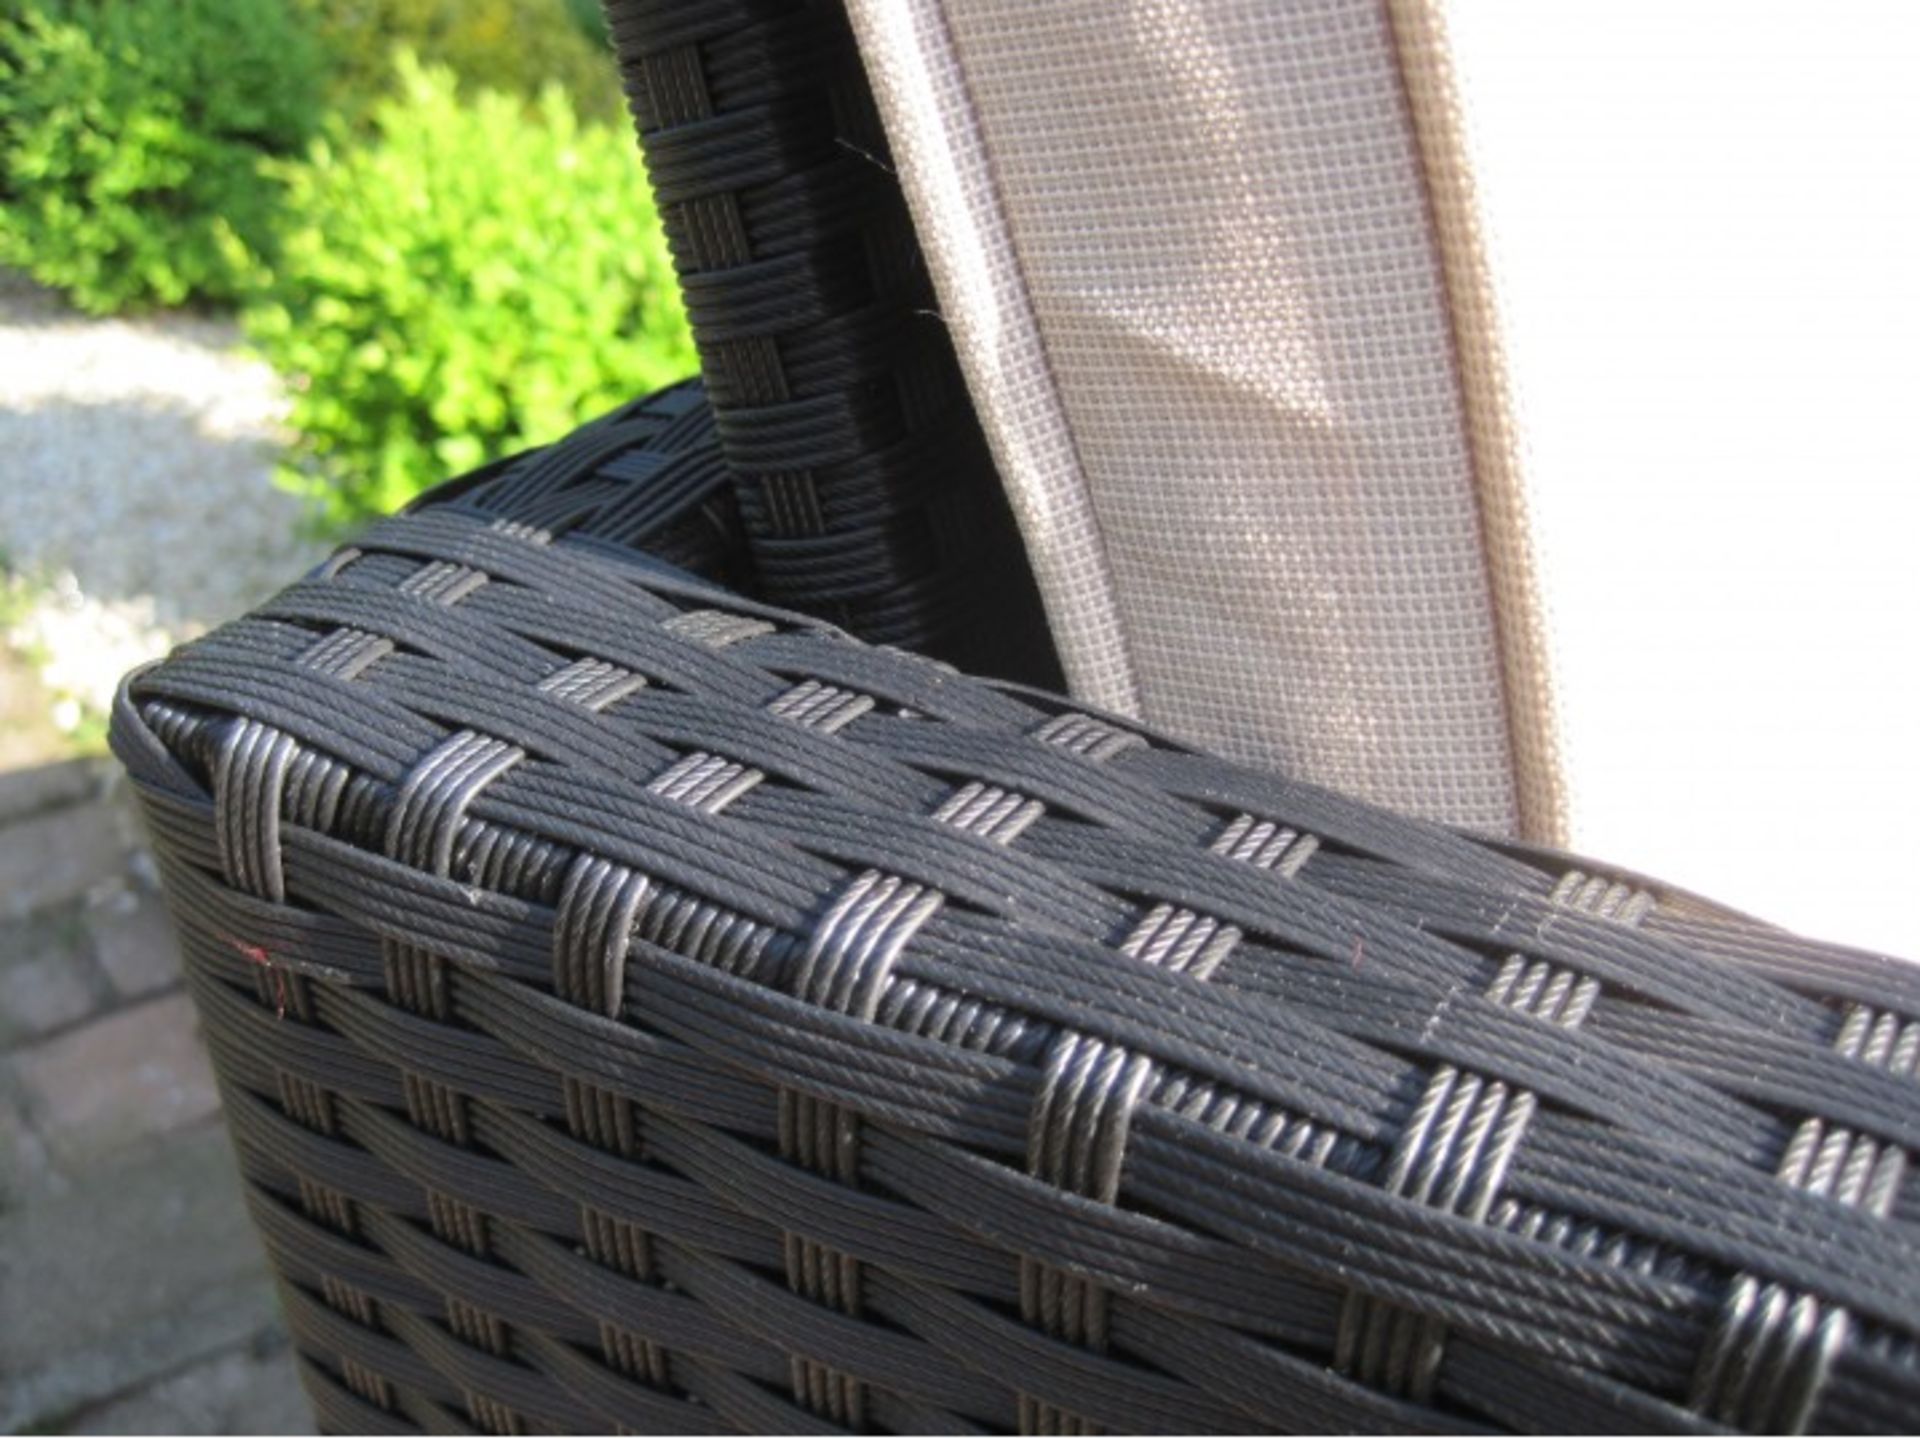 NEW Toscana balcony furniture set in Black - Image 7 of 10